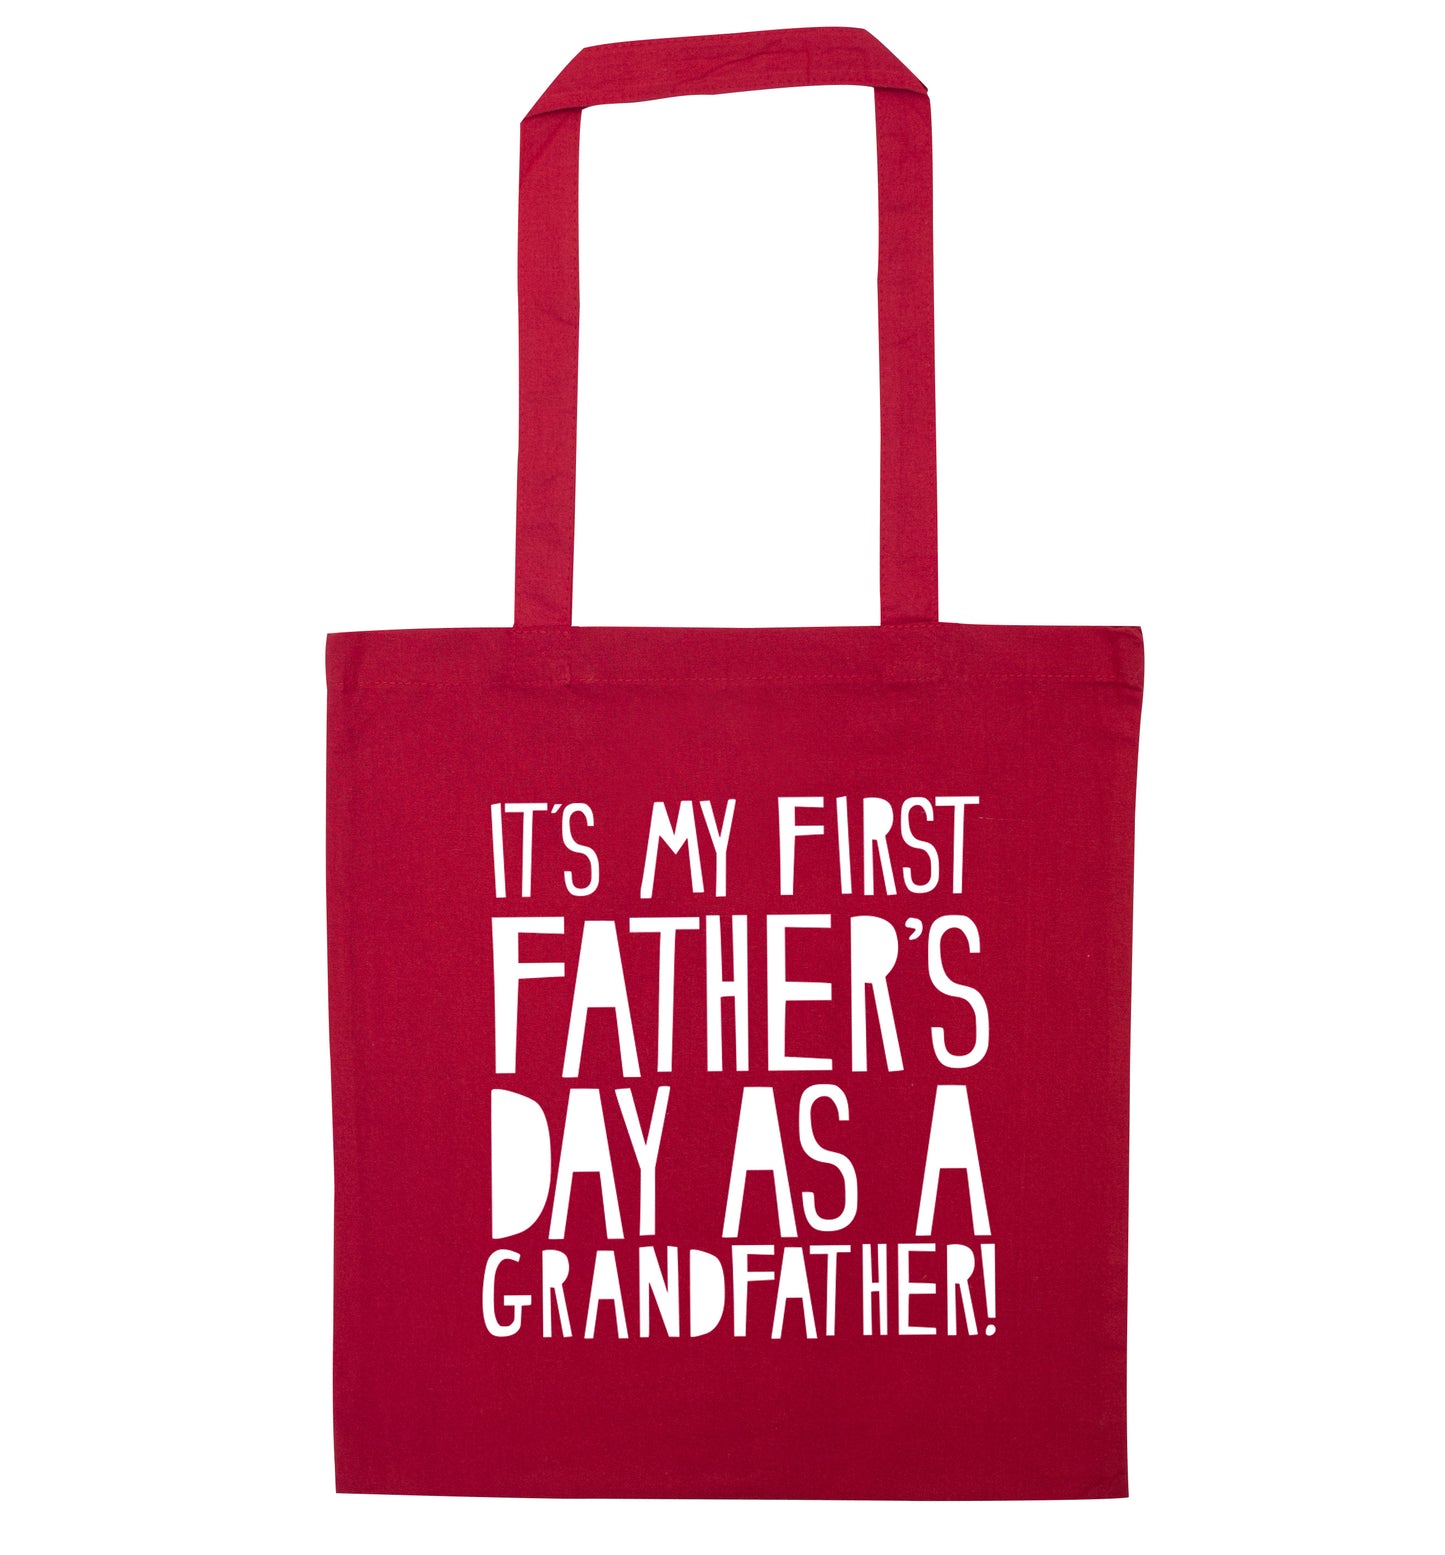 It's my first Father's Day as a Grandfather! red tote bag